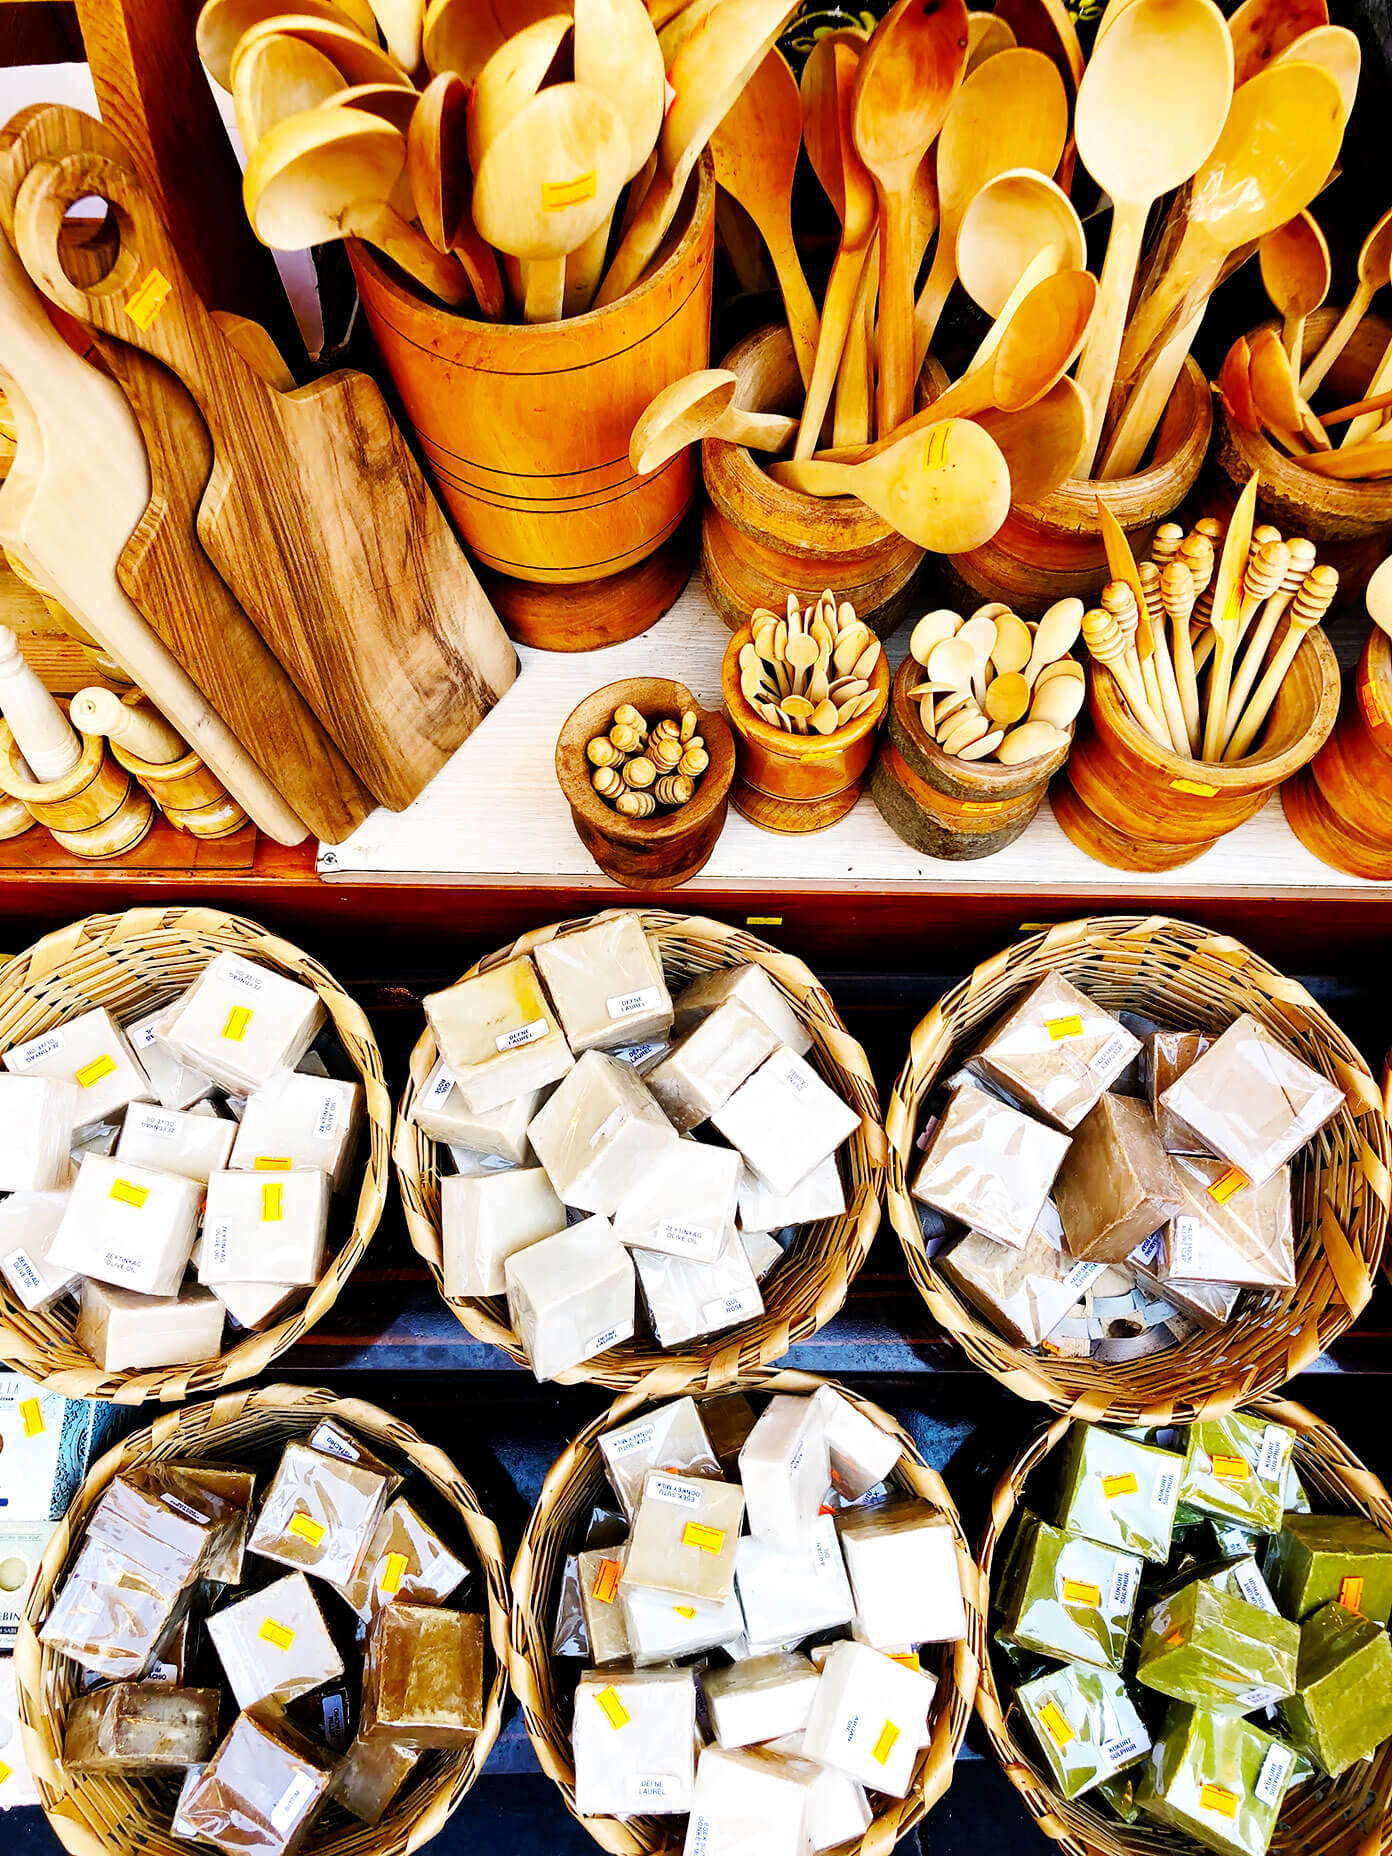 Spice Market Istanbul Soaps and Wooden Spoons